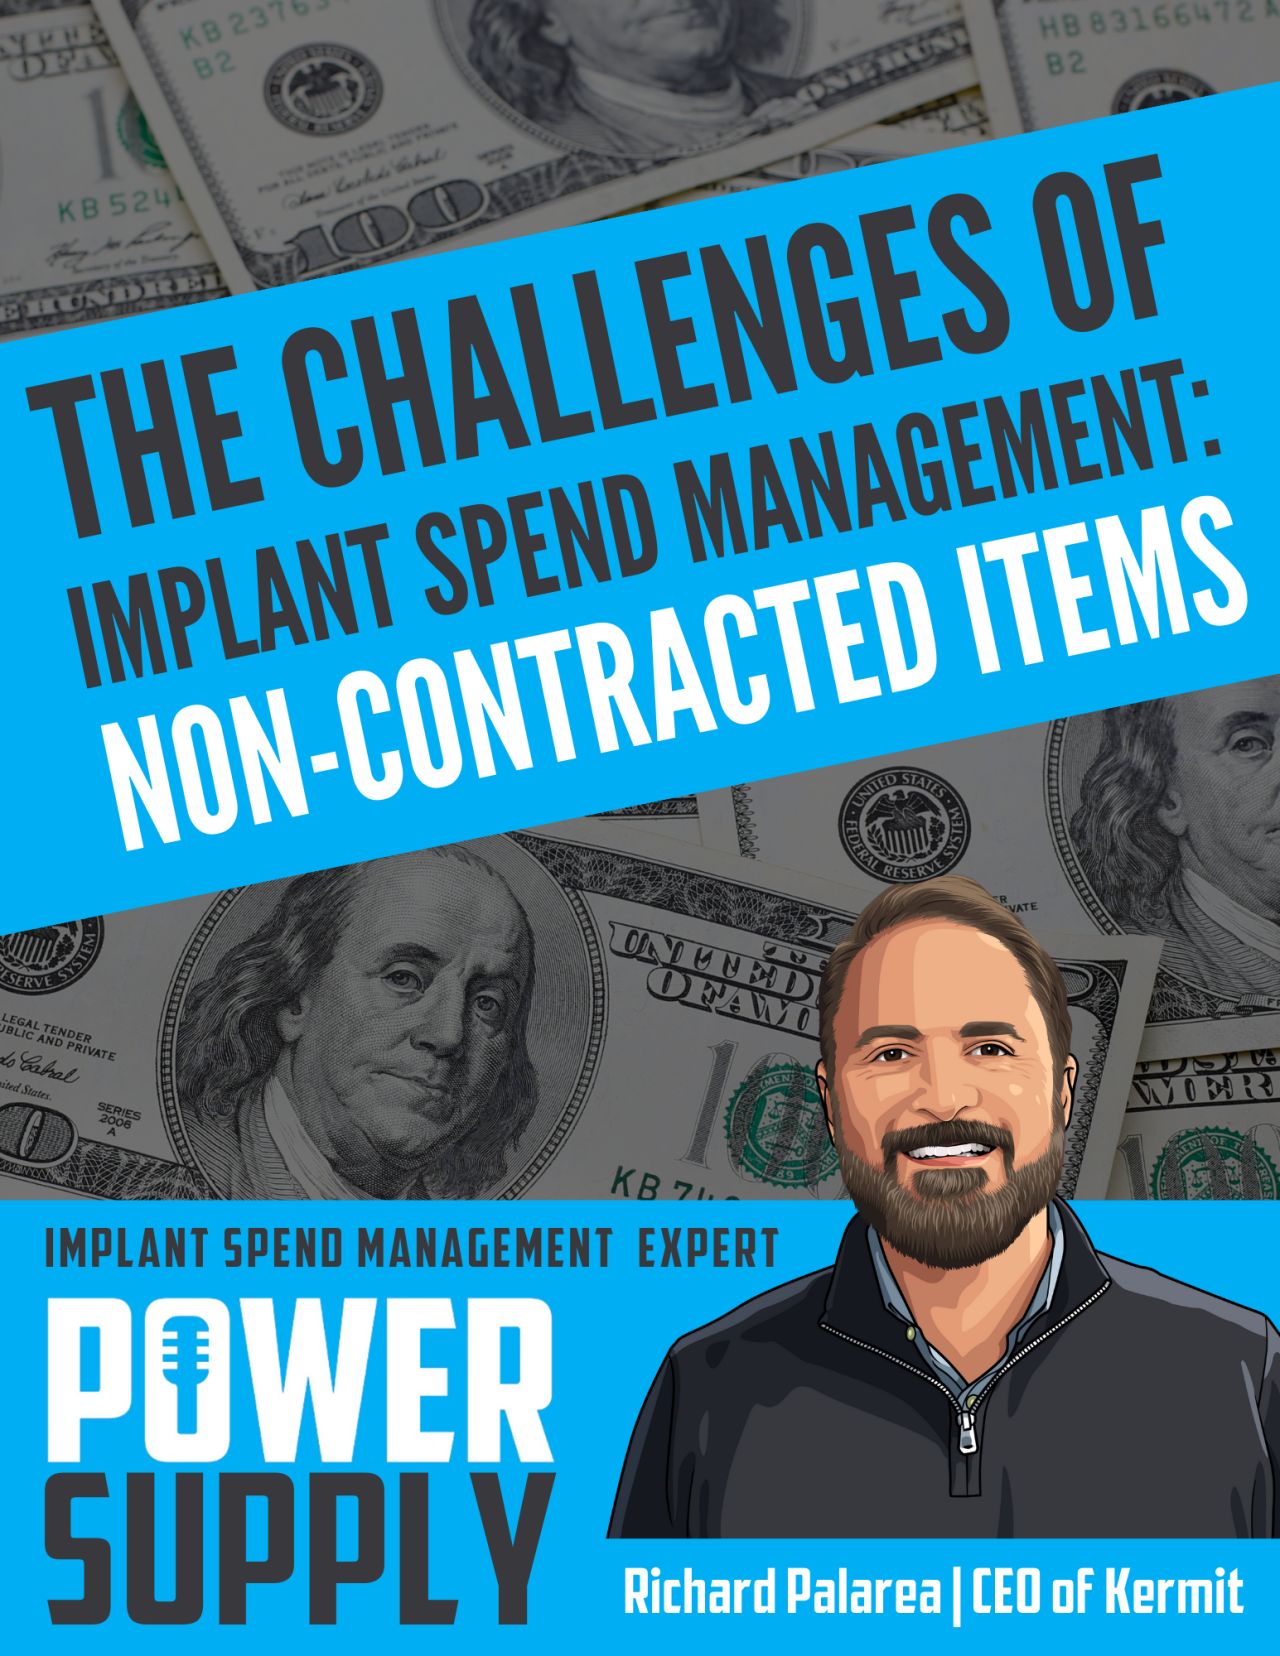 Power Supply Expert Series - Part 2 - The Challenges of Implant Spend Management: Non-Contracted Items